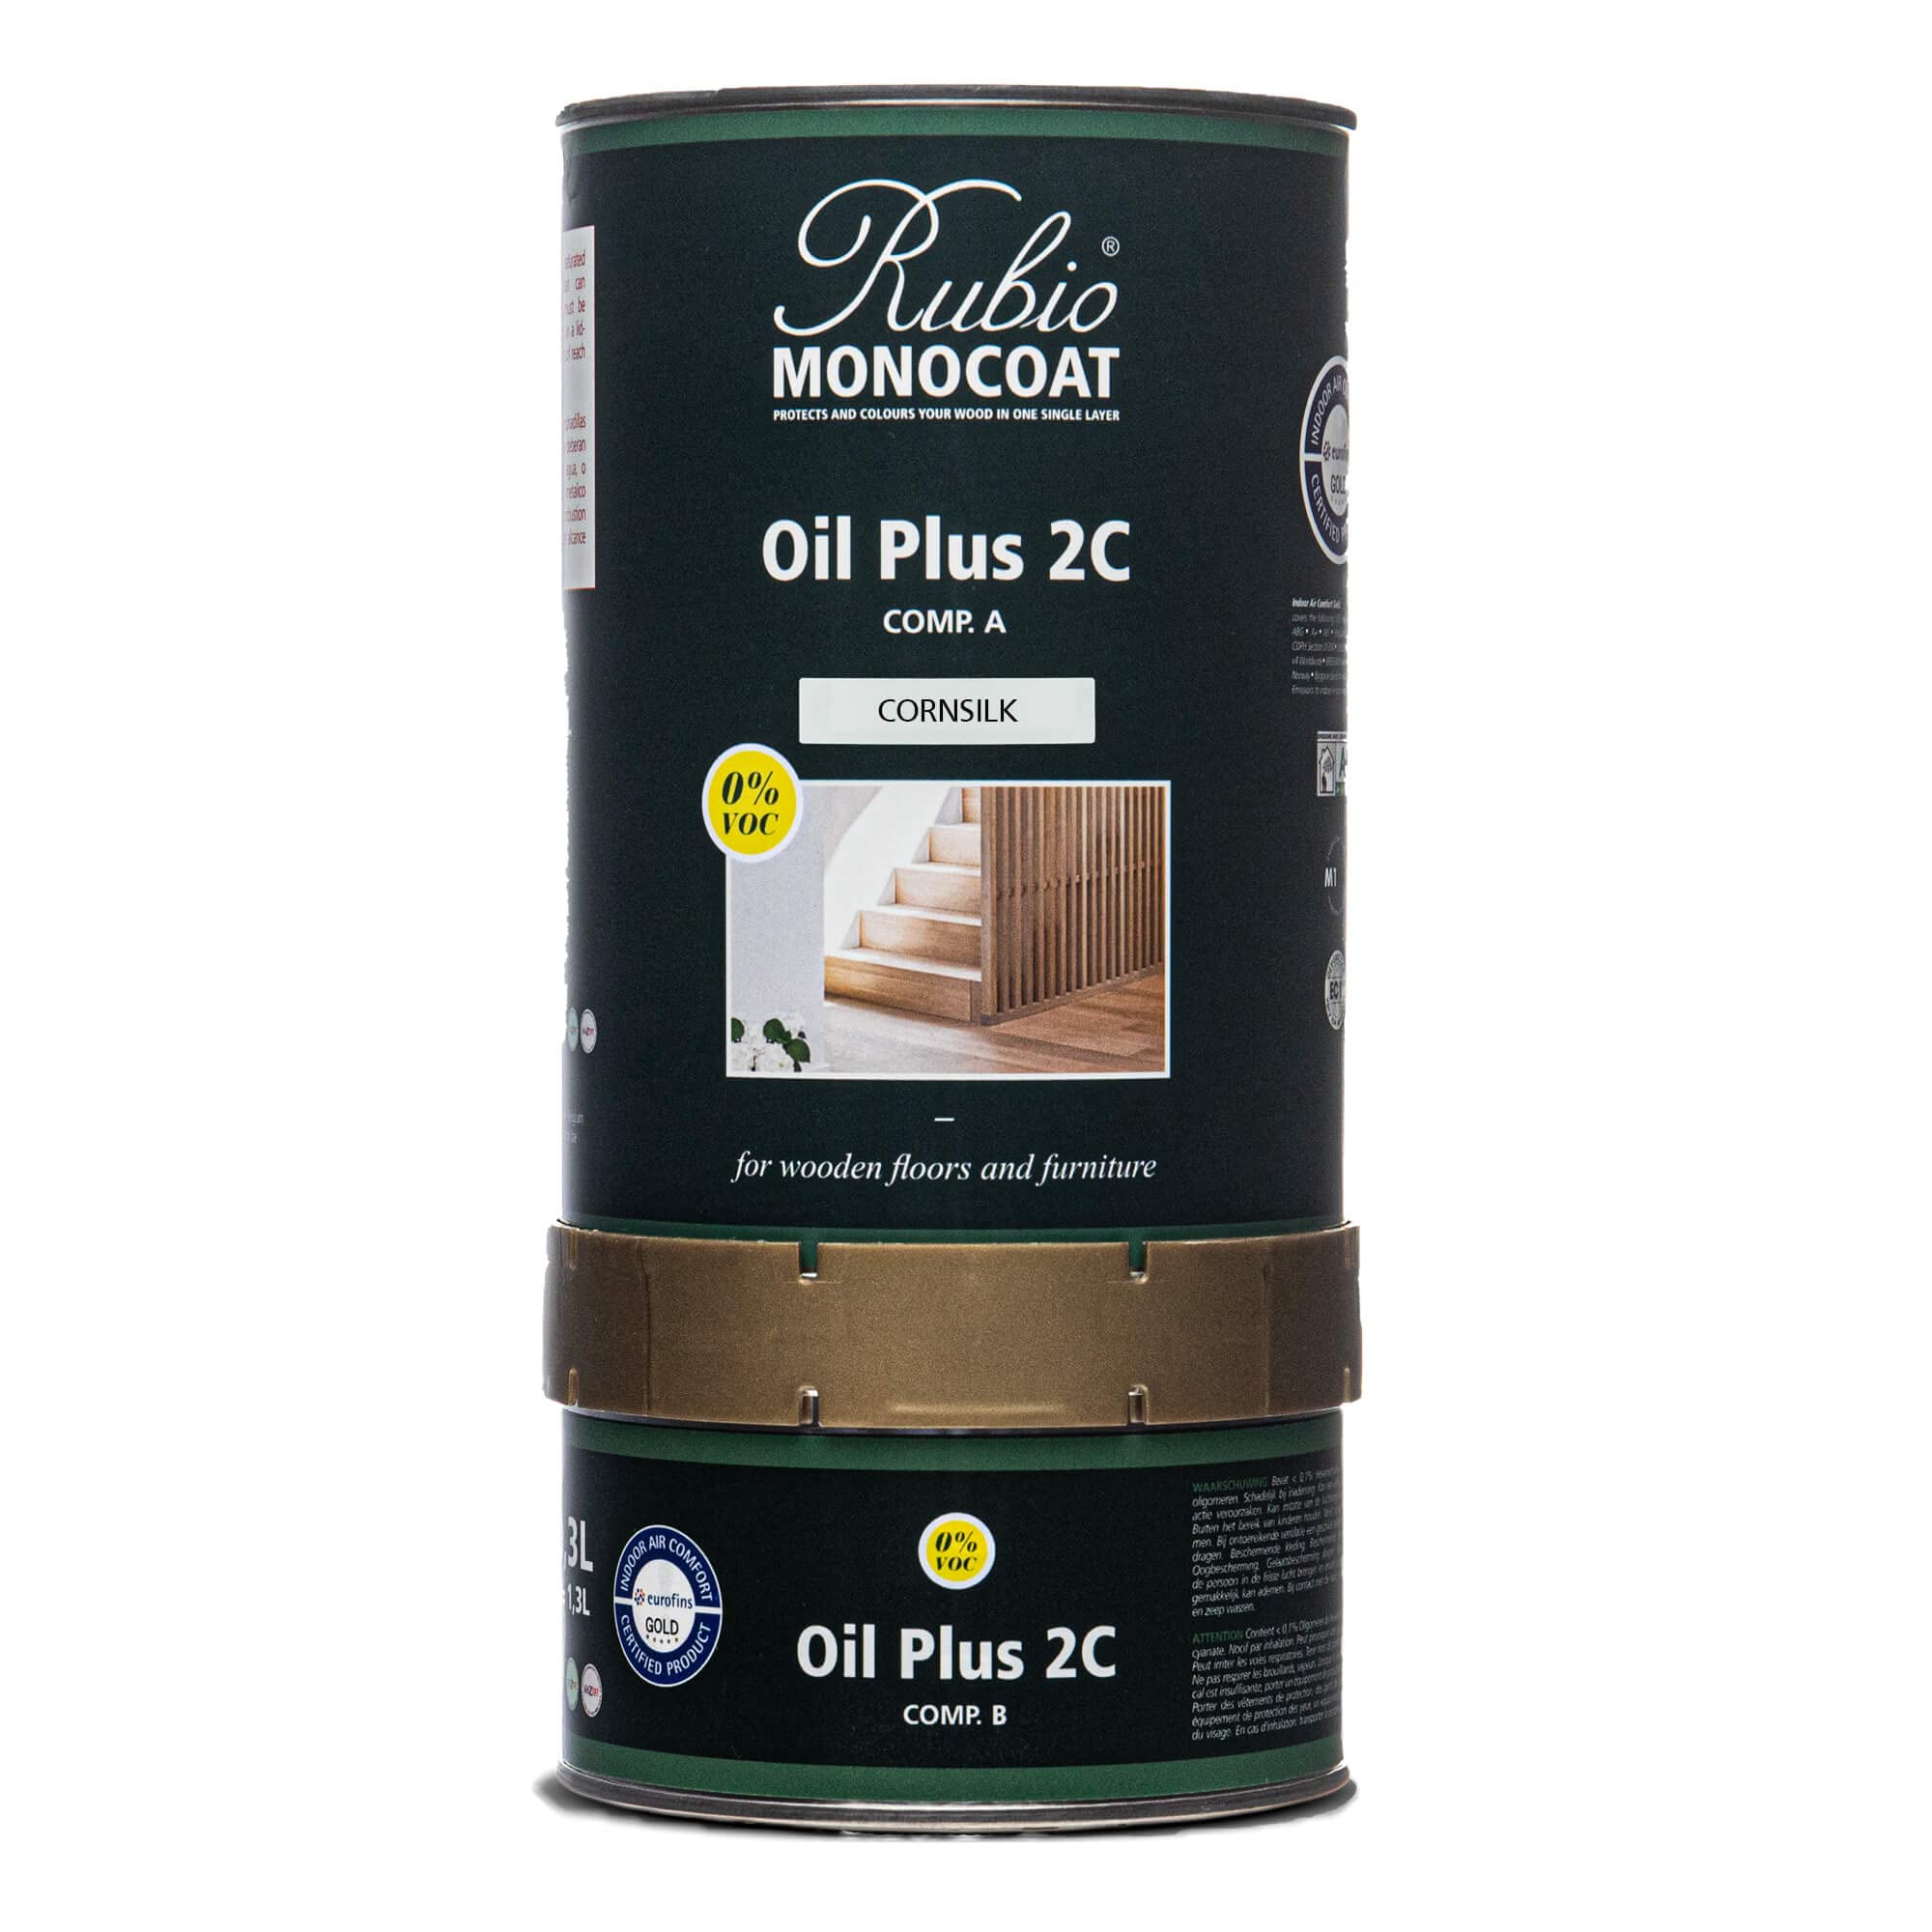 Rubio Monocoat Oil Plus 2C, 1.3 Liter, Cornsilk, Interior Wood Stain and Finish, Food Safe, Easy One-Coat, Linseed Oil, Plant Based, VOC/Solvent Free, Furniture & Flooring Hardwax Oil